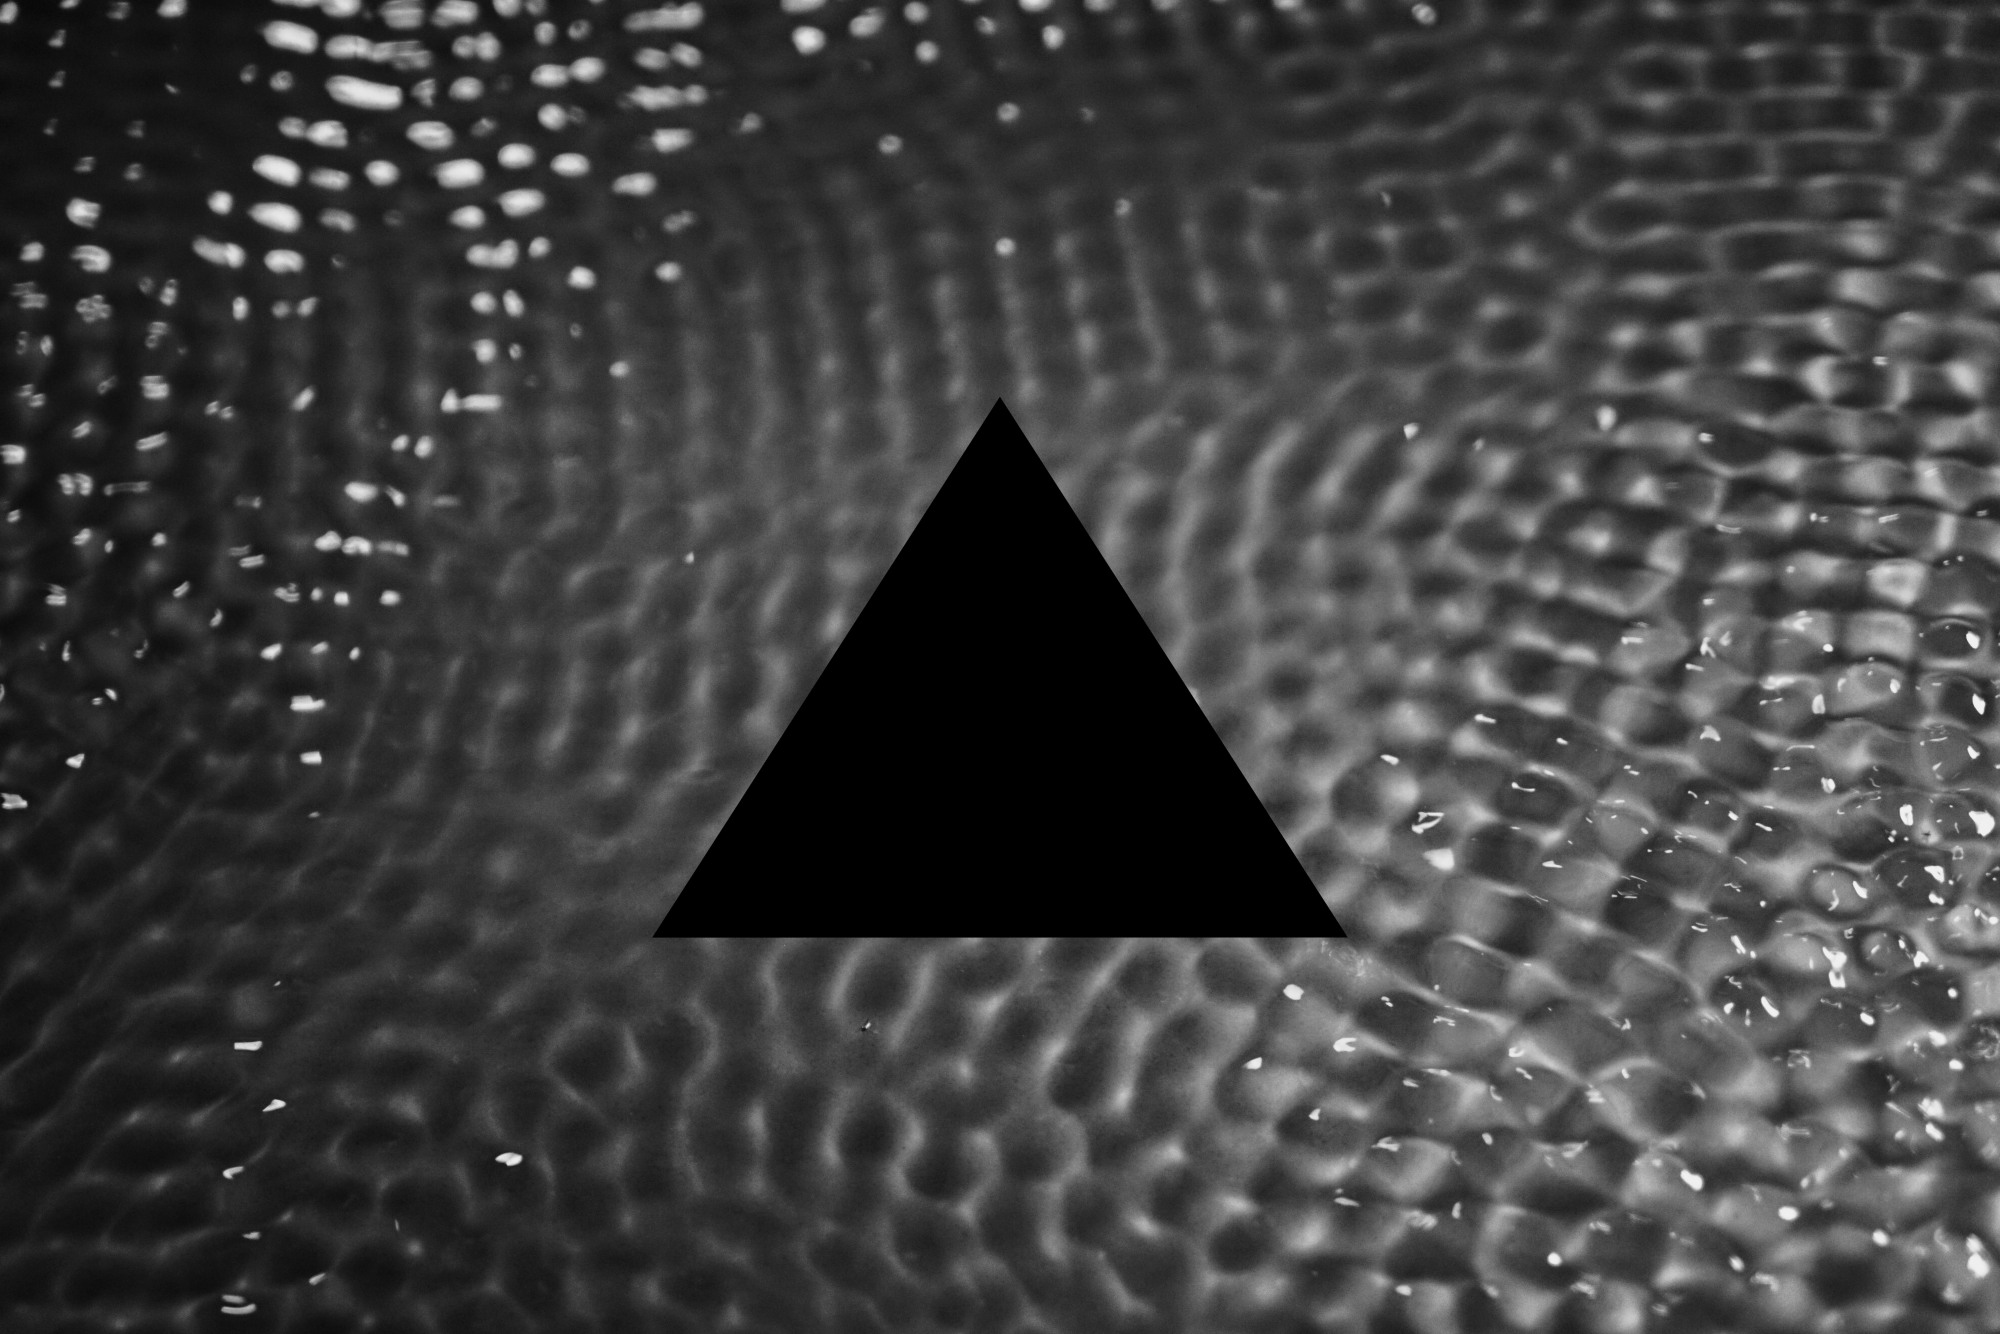 textured grayscale background with an upright black triangle in the center